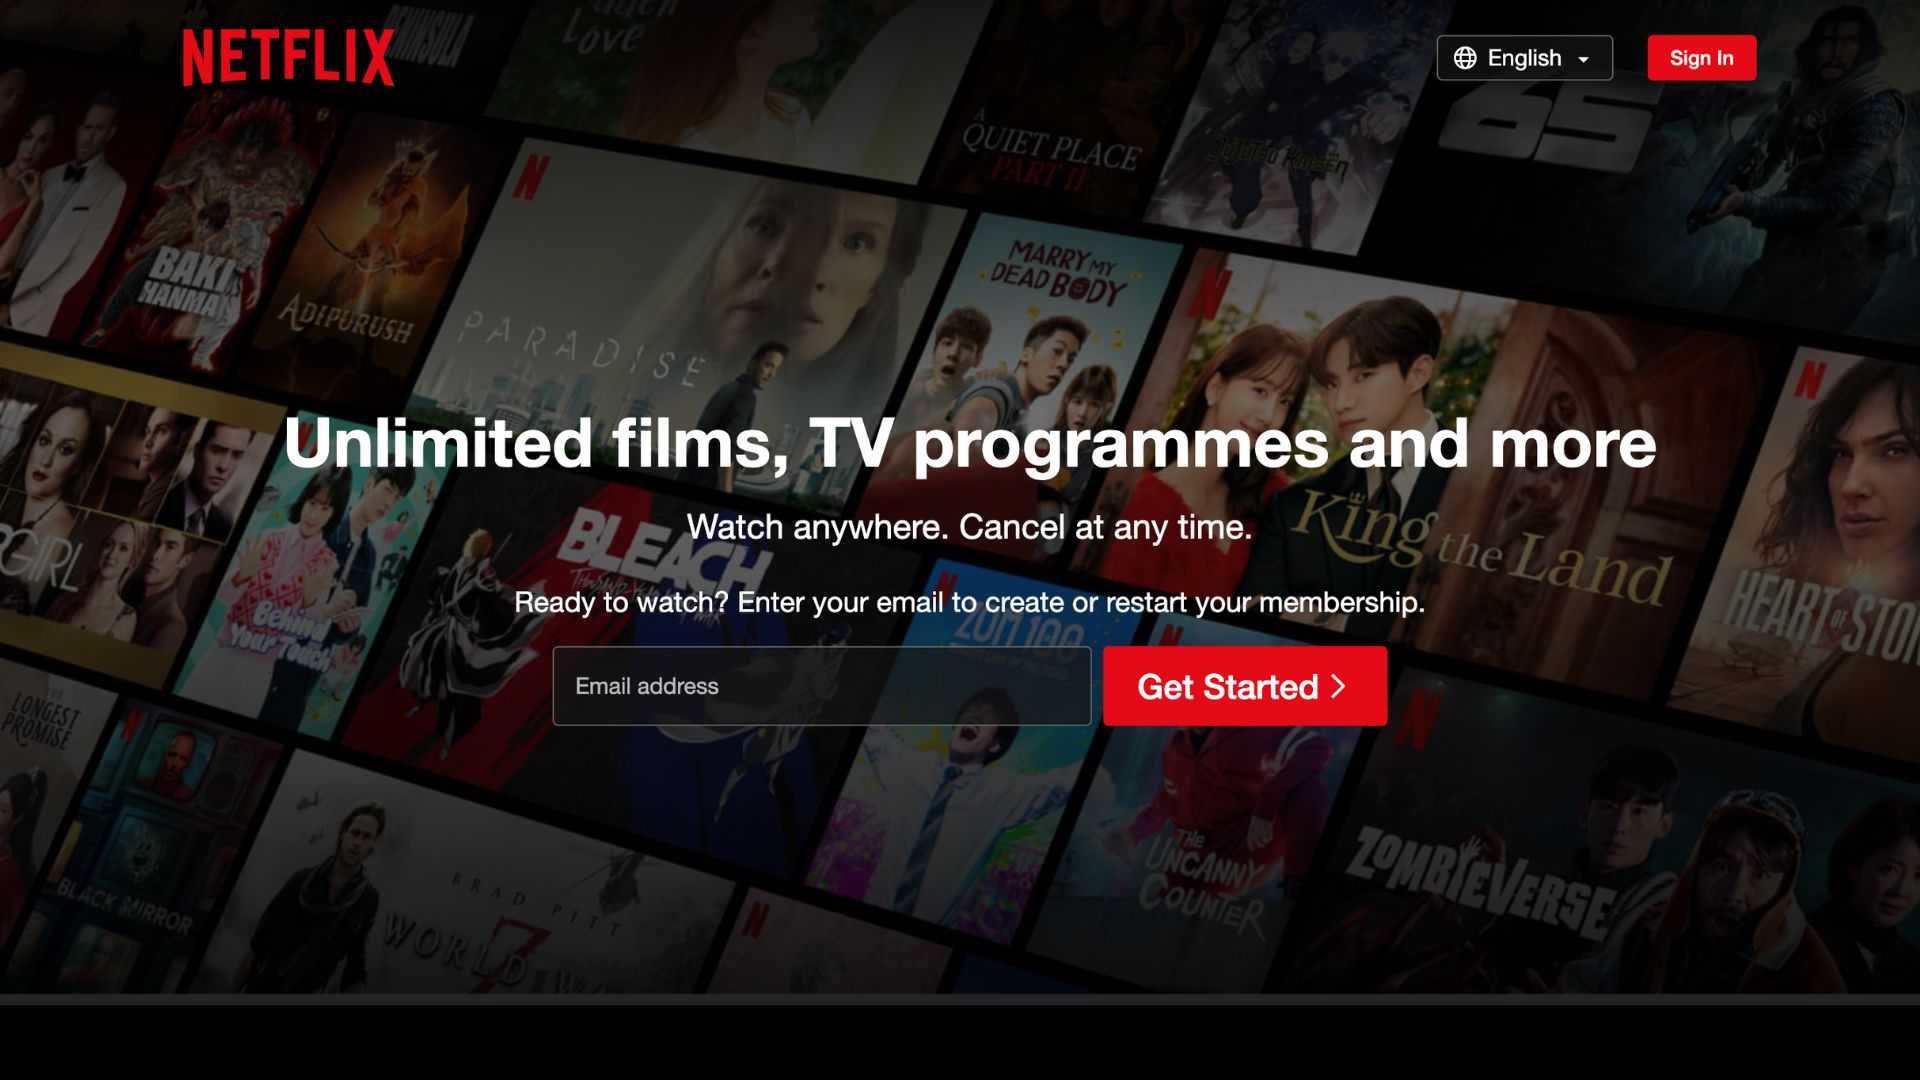 Example of a landing page that makes people want to sign up, Netflix.com